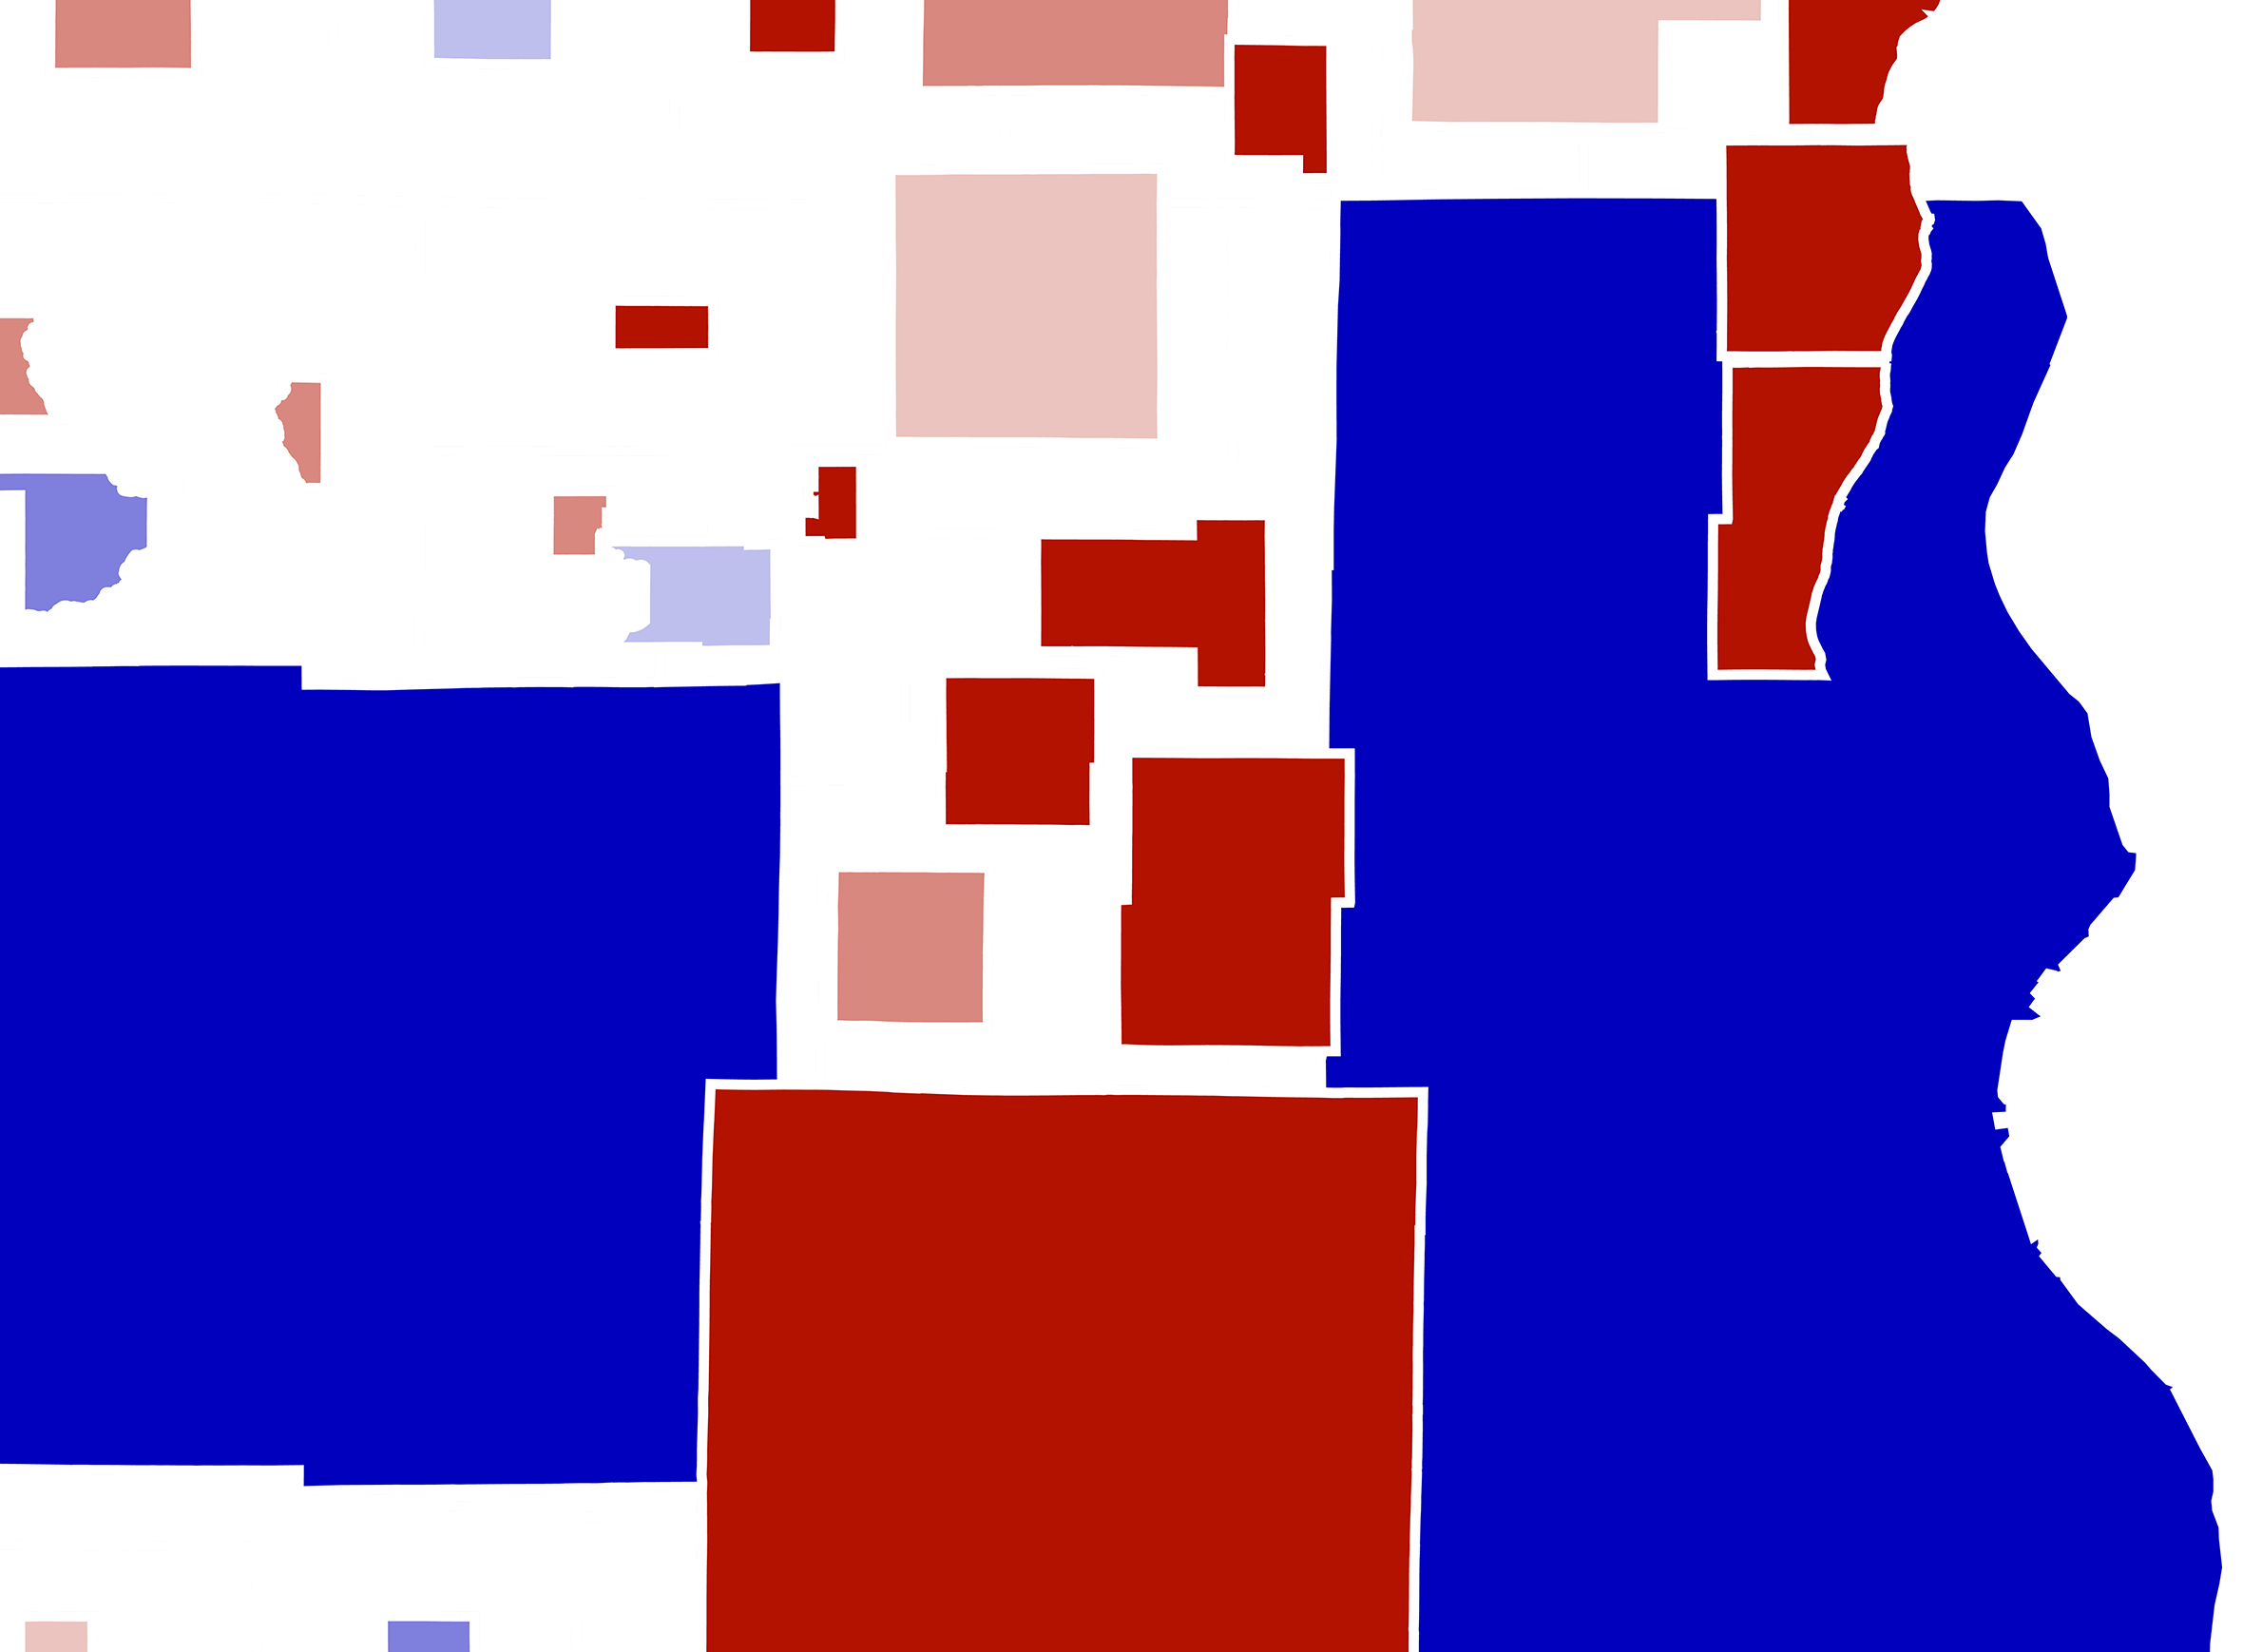 WisContext: Cartogram: Wisconsin’s 2018 Election For Governor